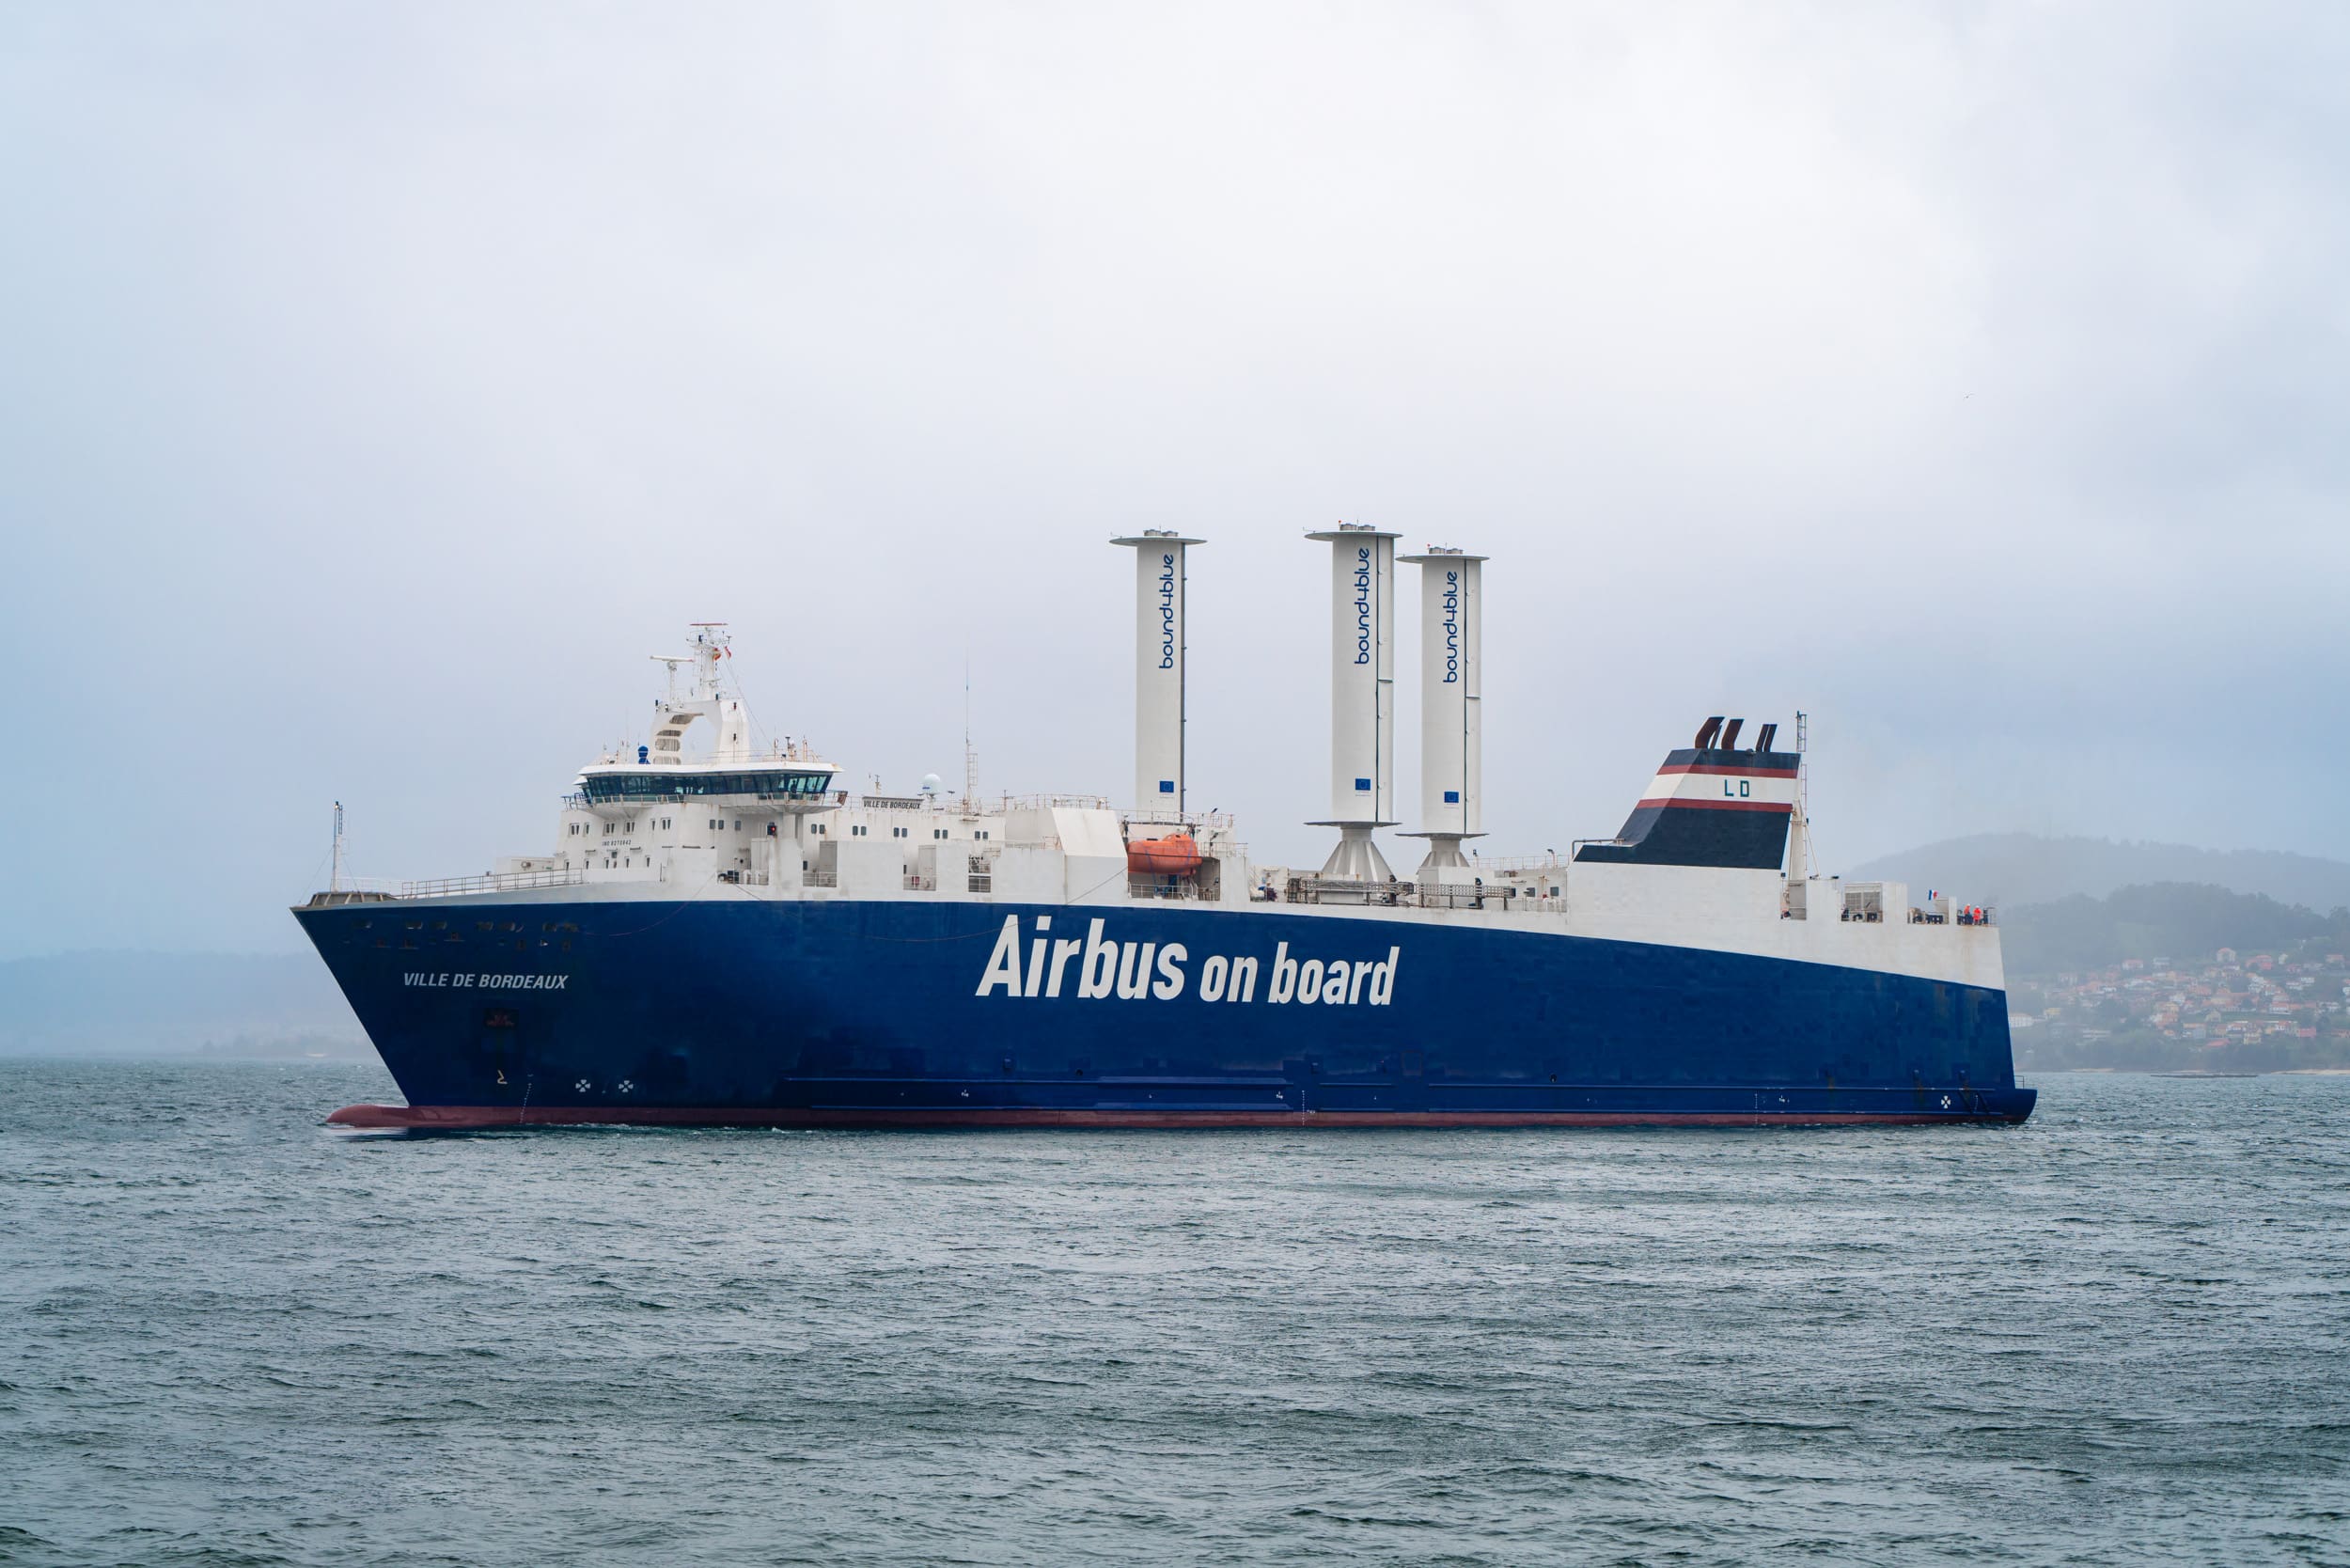 First-ever fixed suction sails for ro-ro segment as bound4blue completes eSAILs® installation on Airbus-chartered LDA vessel